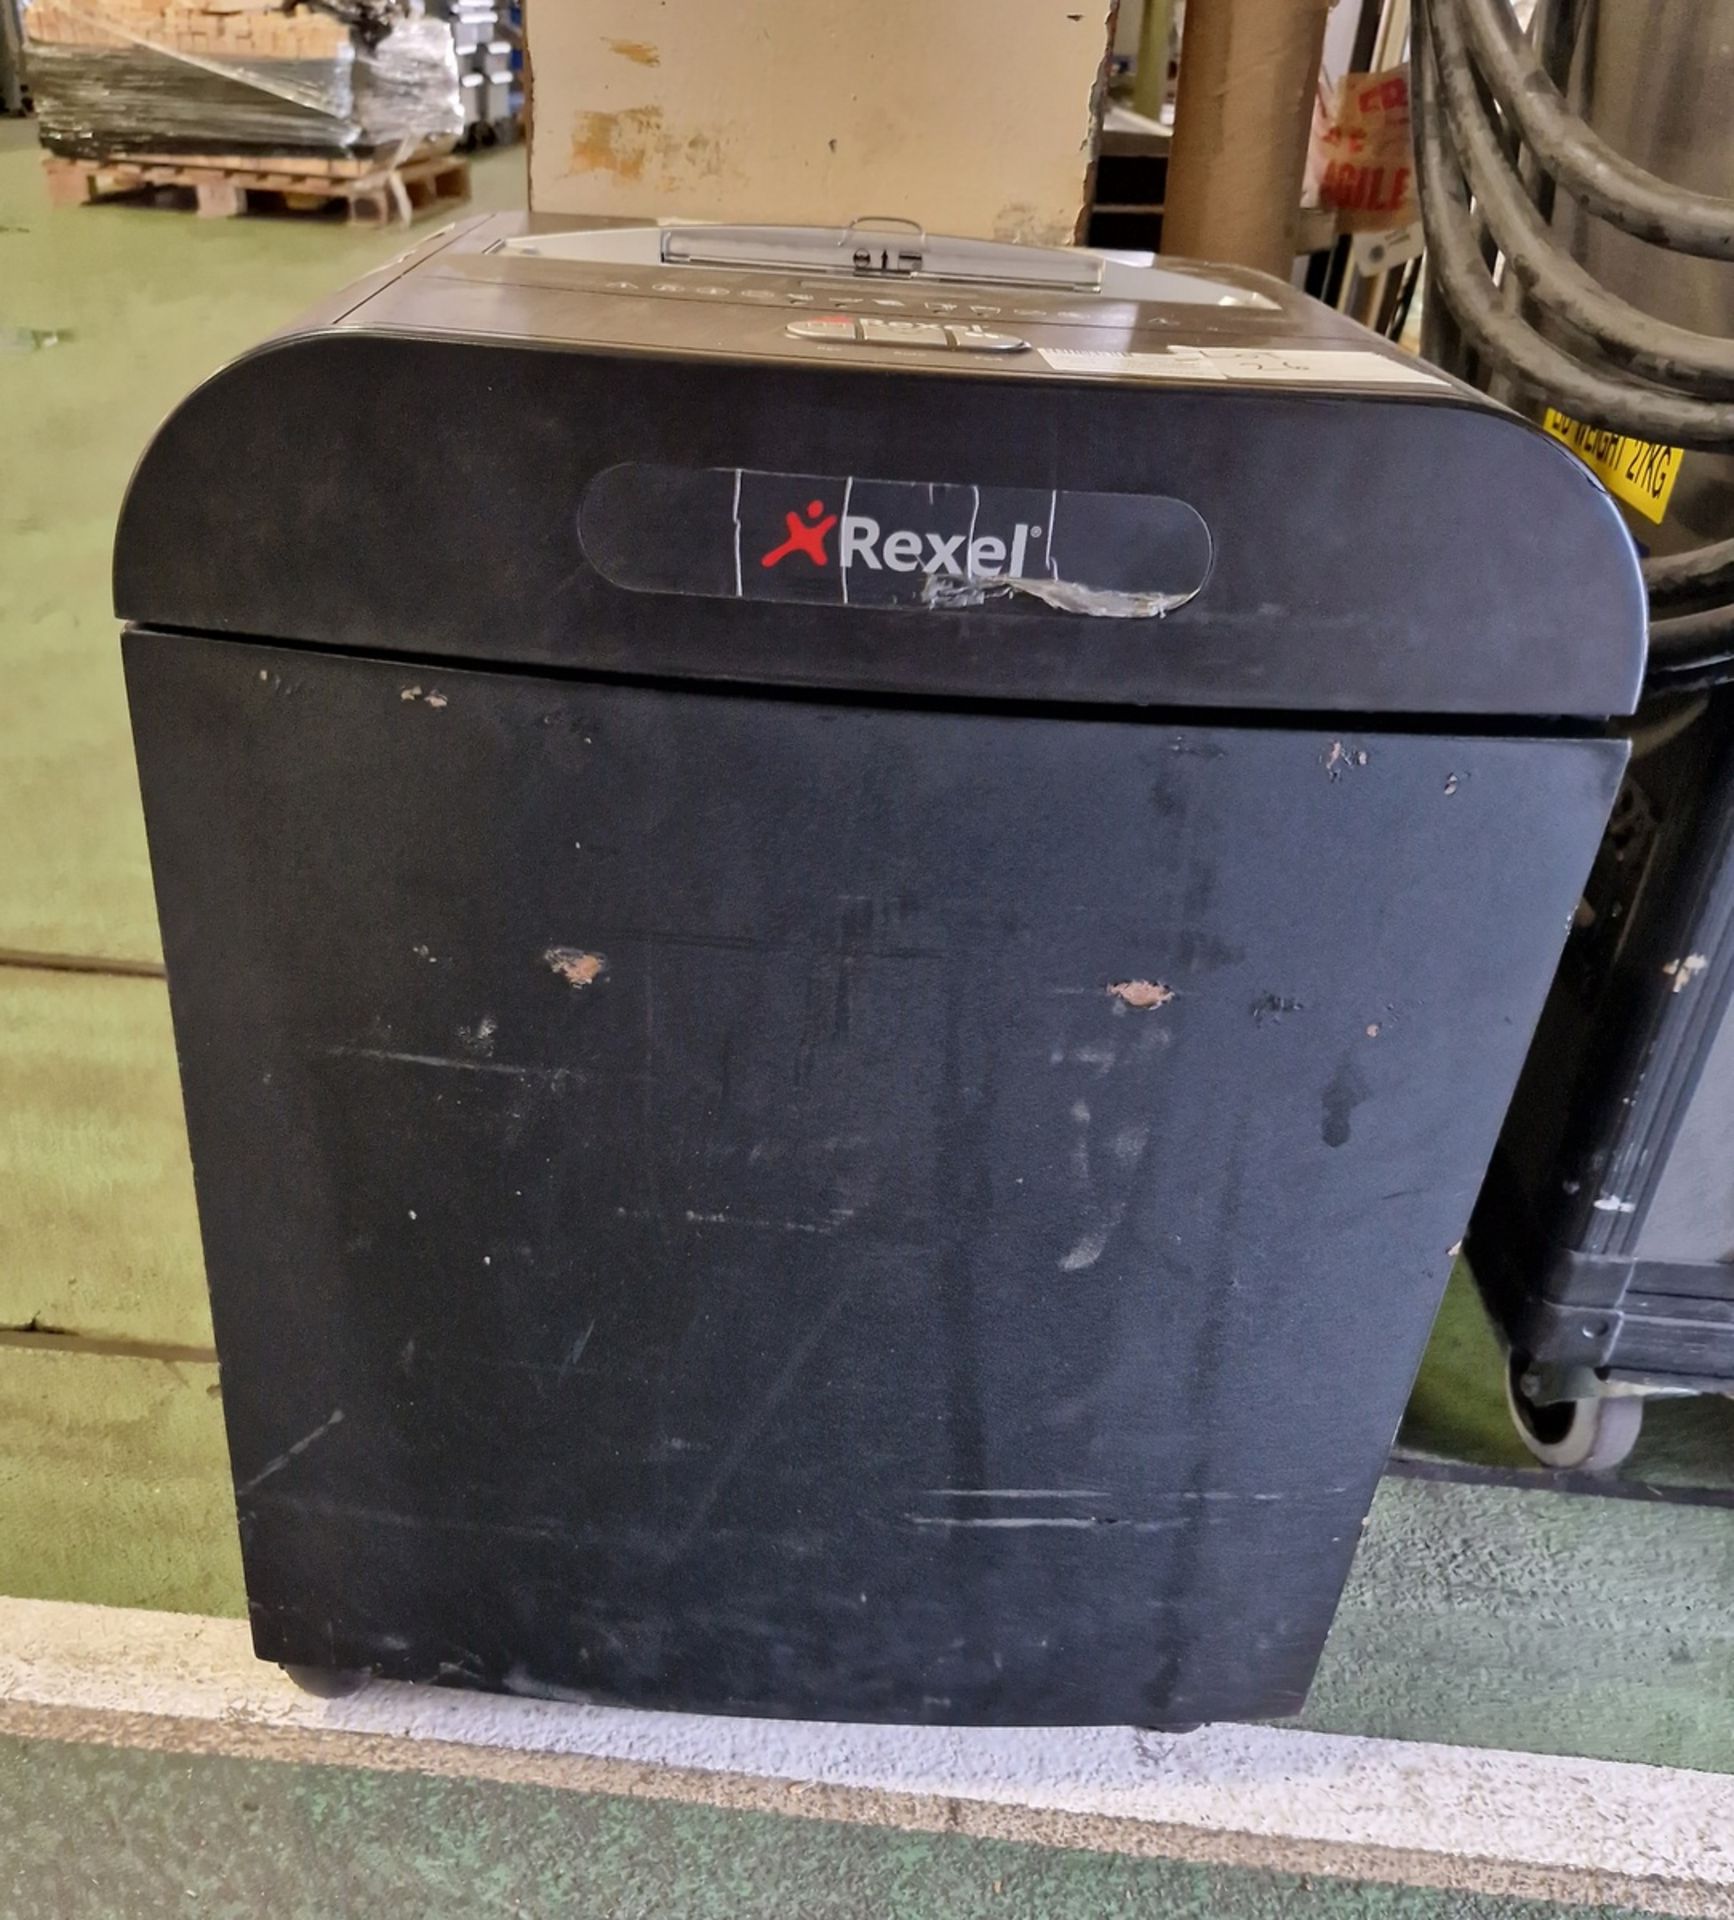 Rexel RDX1850 large paper shredder - 18 sheet capacity - MISSING MAIN ON/OFF BUTTON